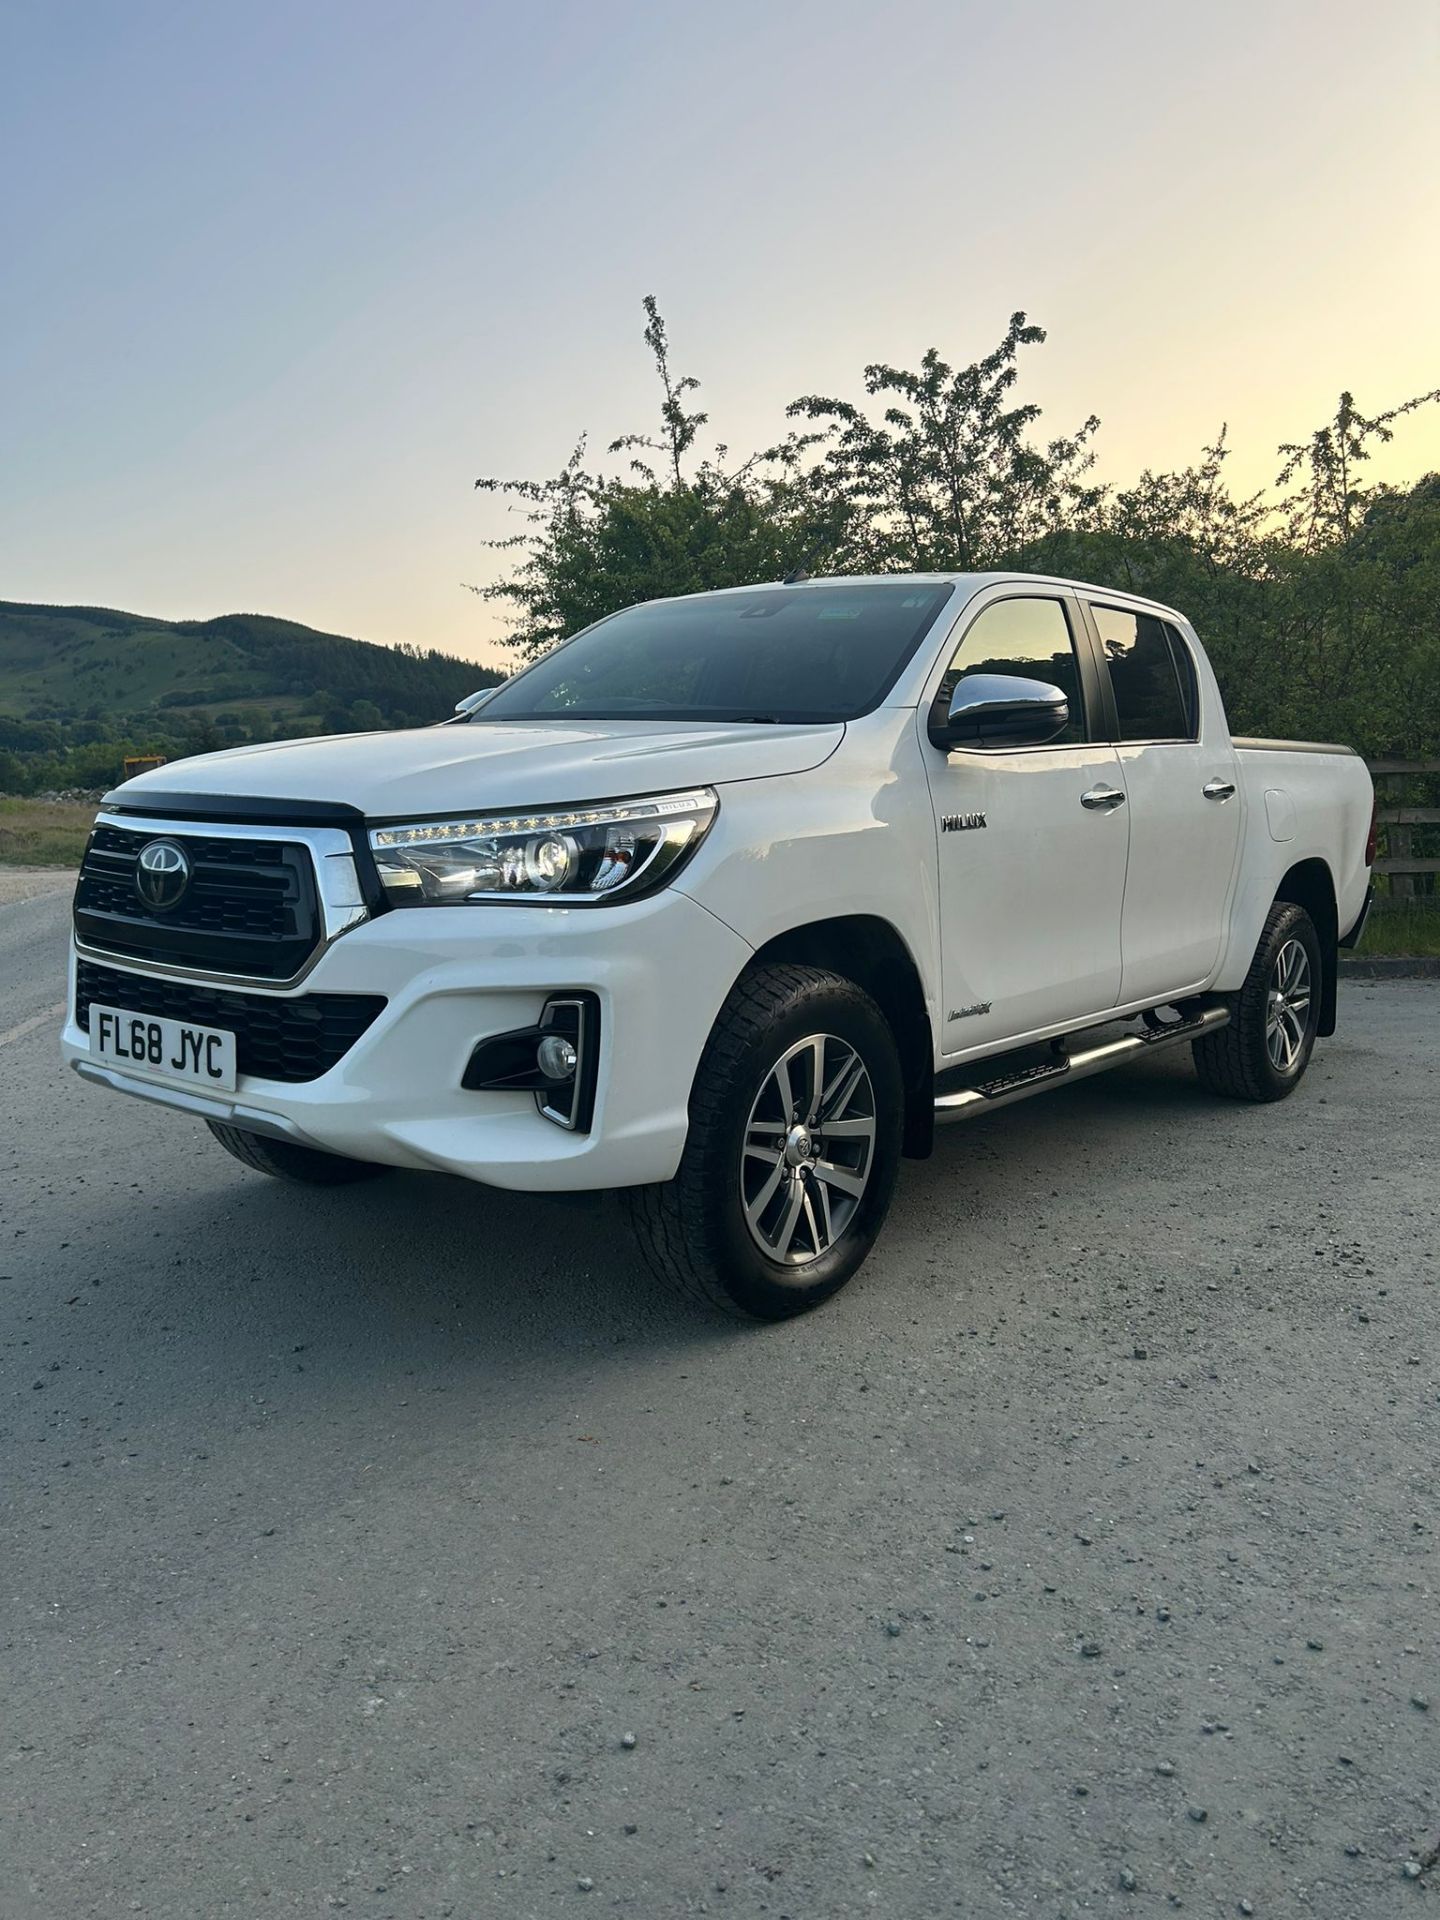 AUTOMATIC 2018 TOYOTA HILUX LIMITED EDITION FACELIFT ROLLER SHUTTER - Image 3 of 18